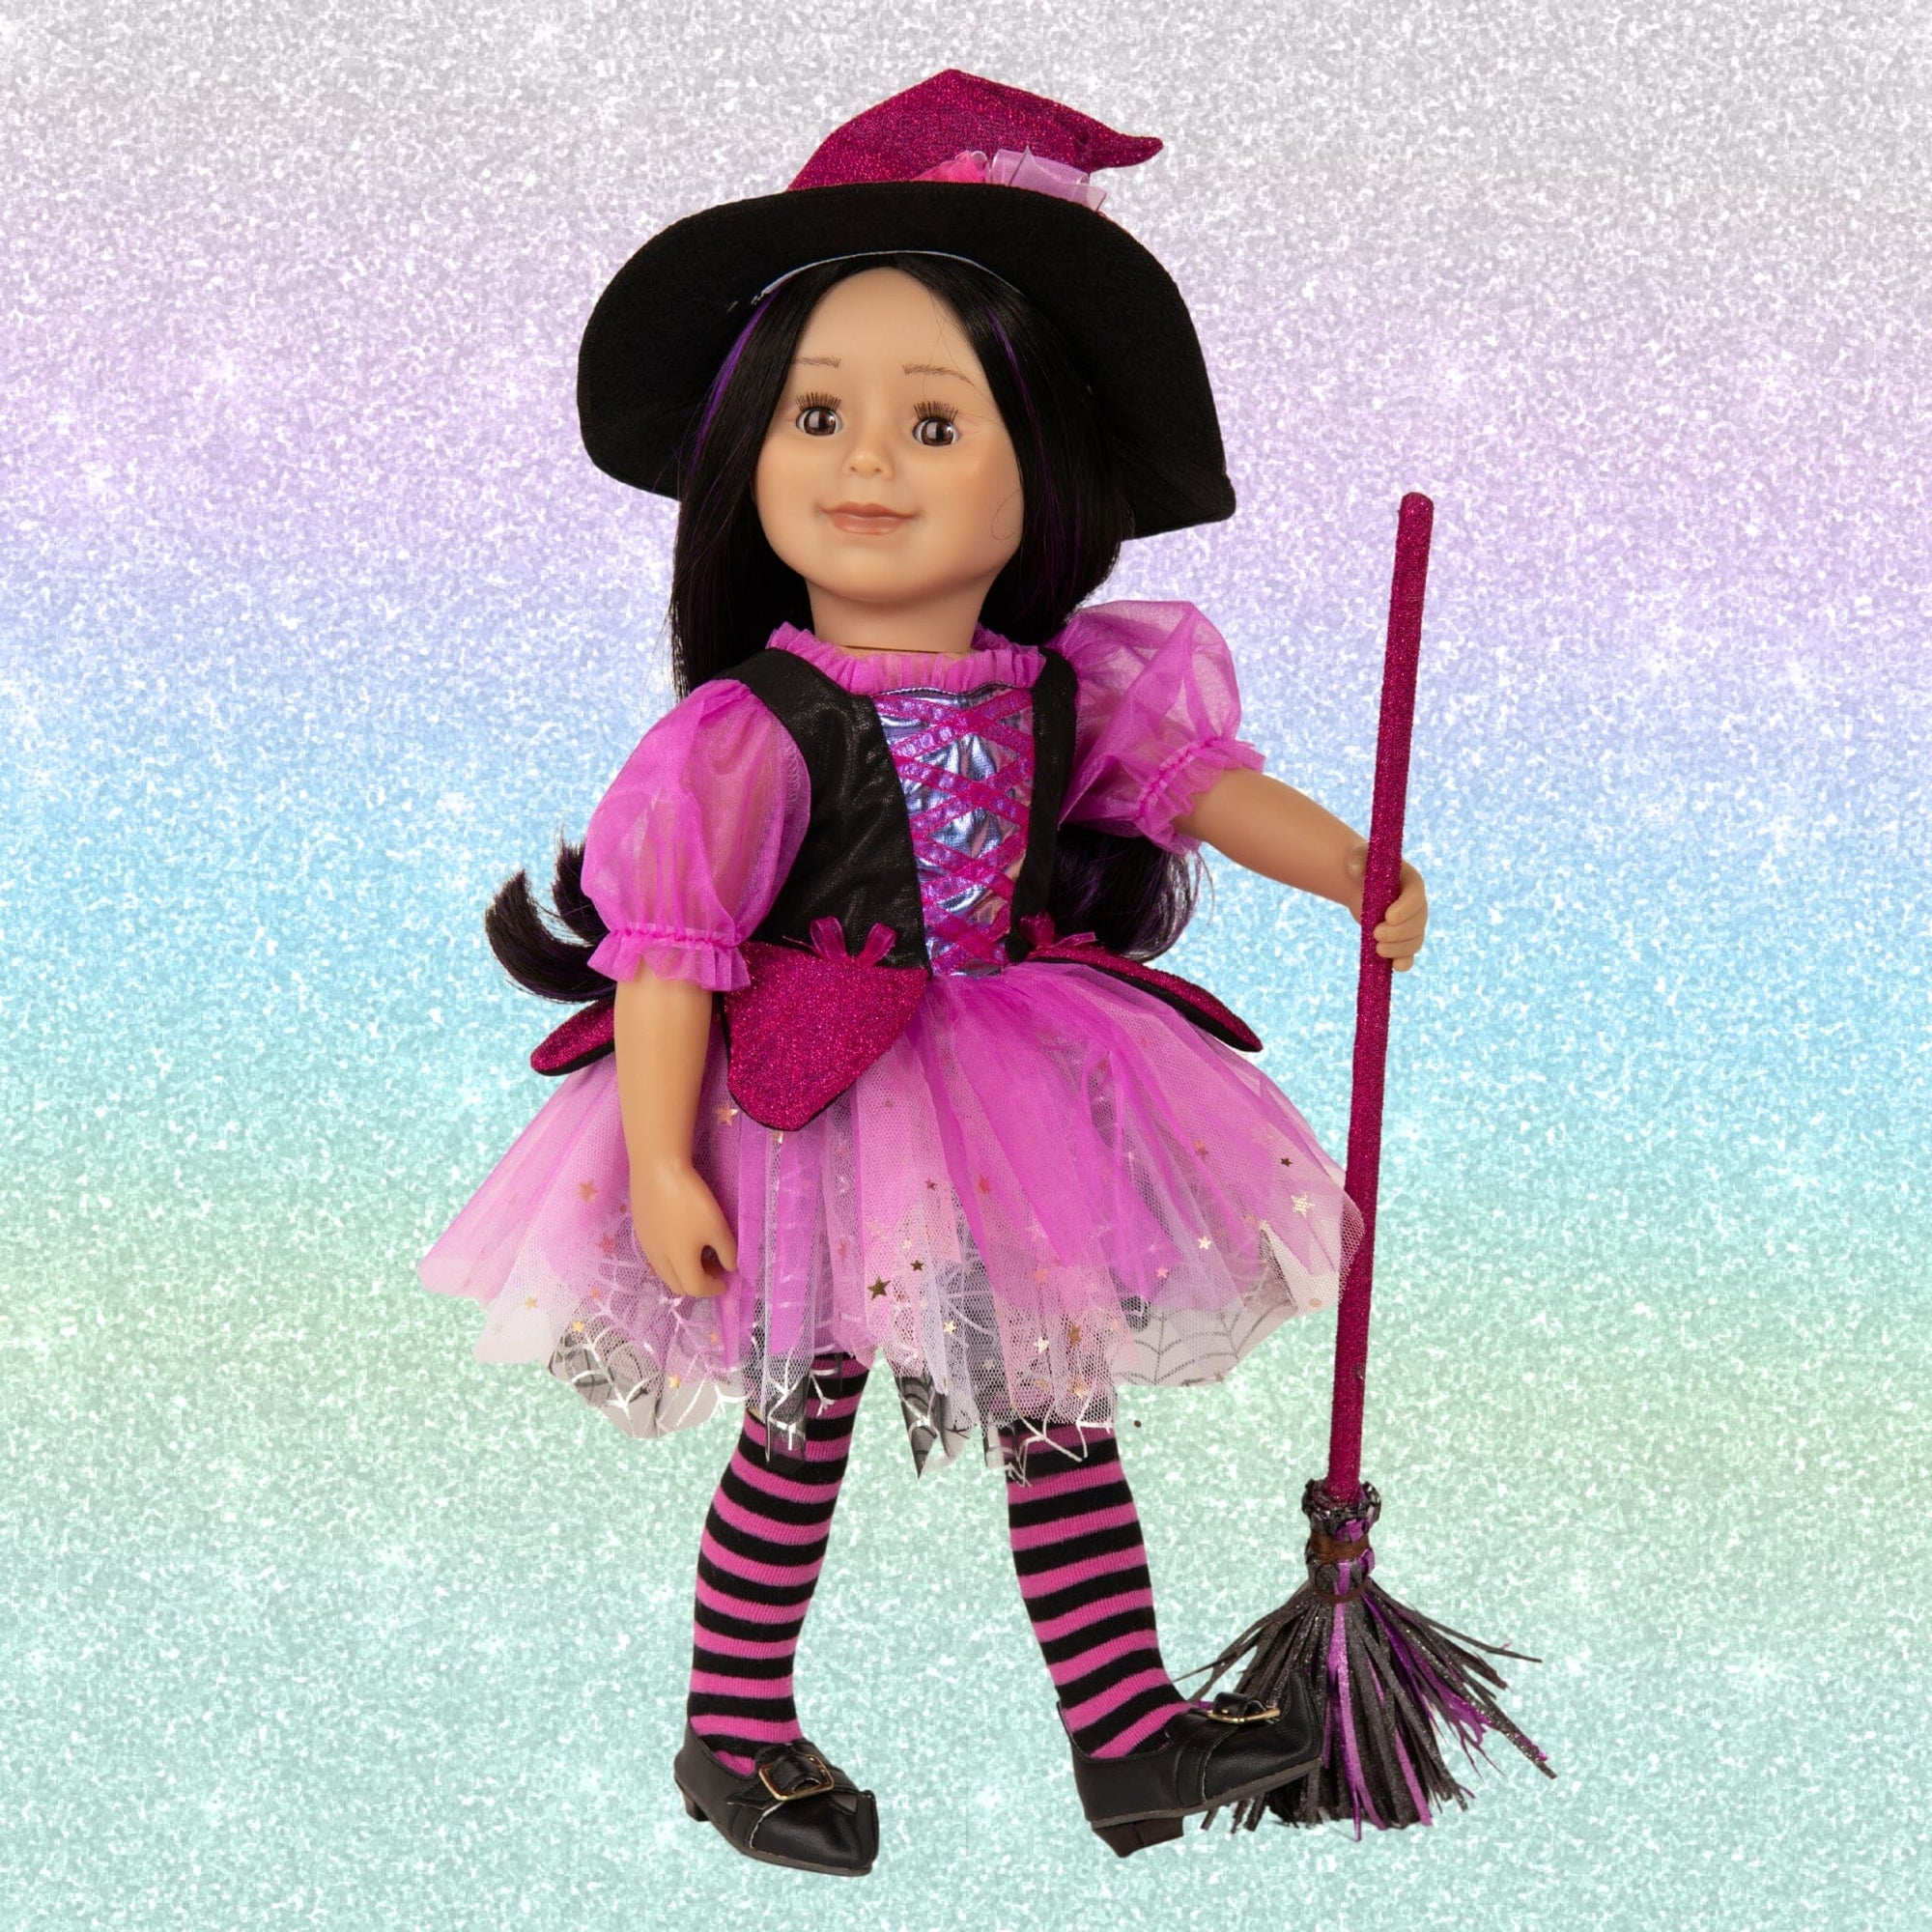 Halloween costume will cast spooky spells on everyone!  For all 18 inch dolls including American Dolls